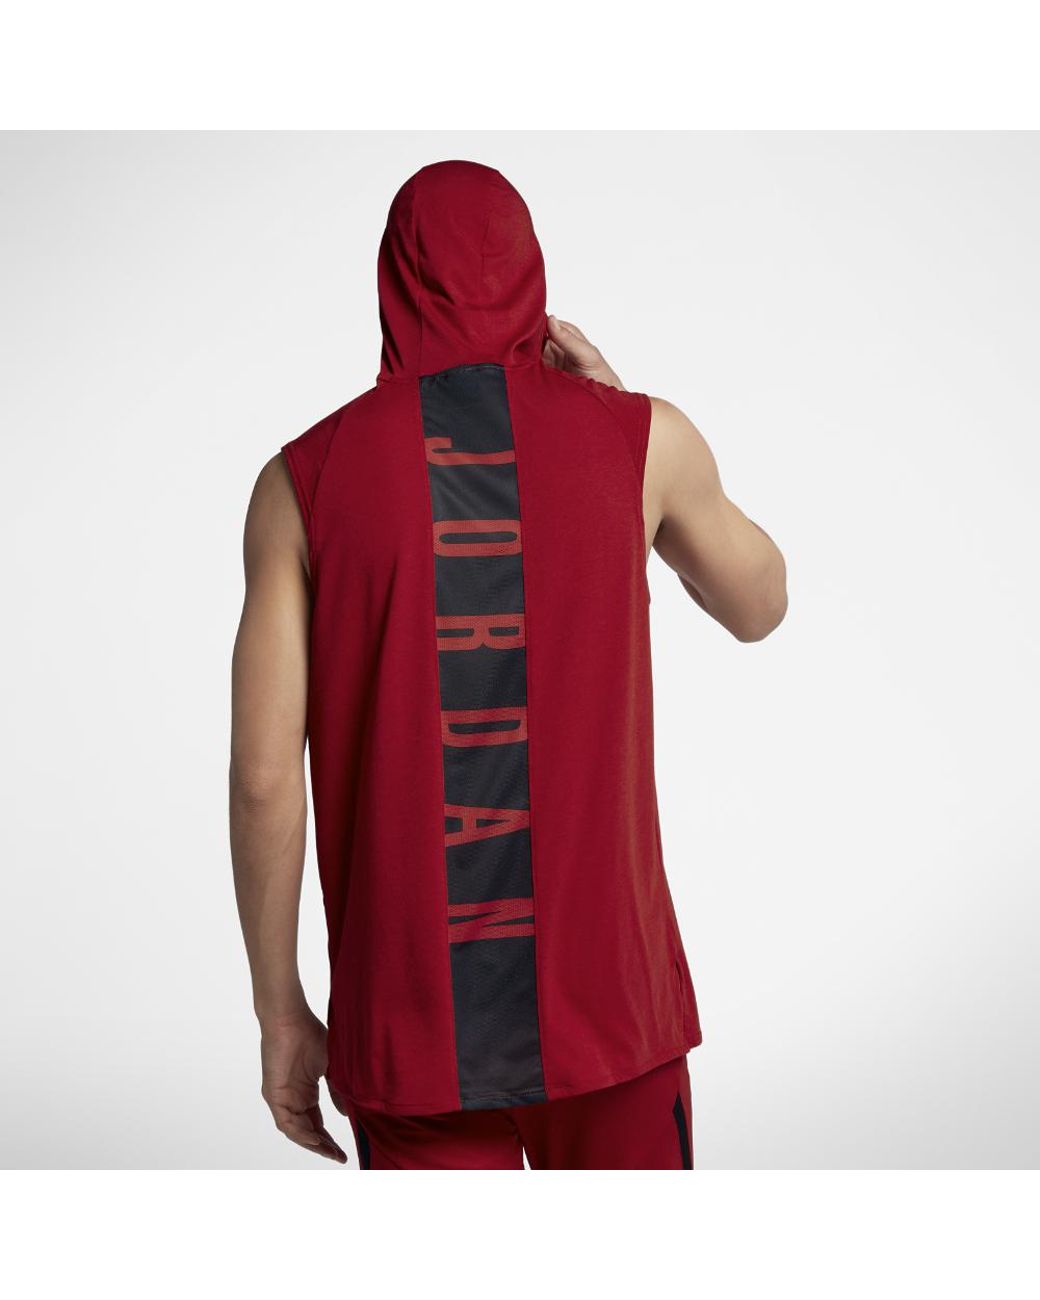 Nike 23 Alpha Men's Hooded Sleeveless Training Top, By Nike in Red for Men  | Lyst